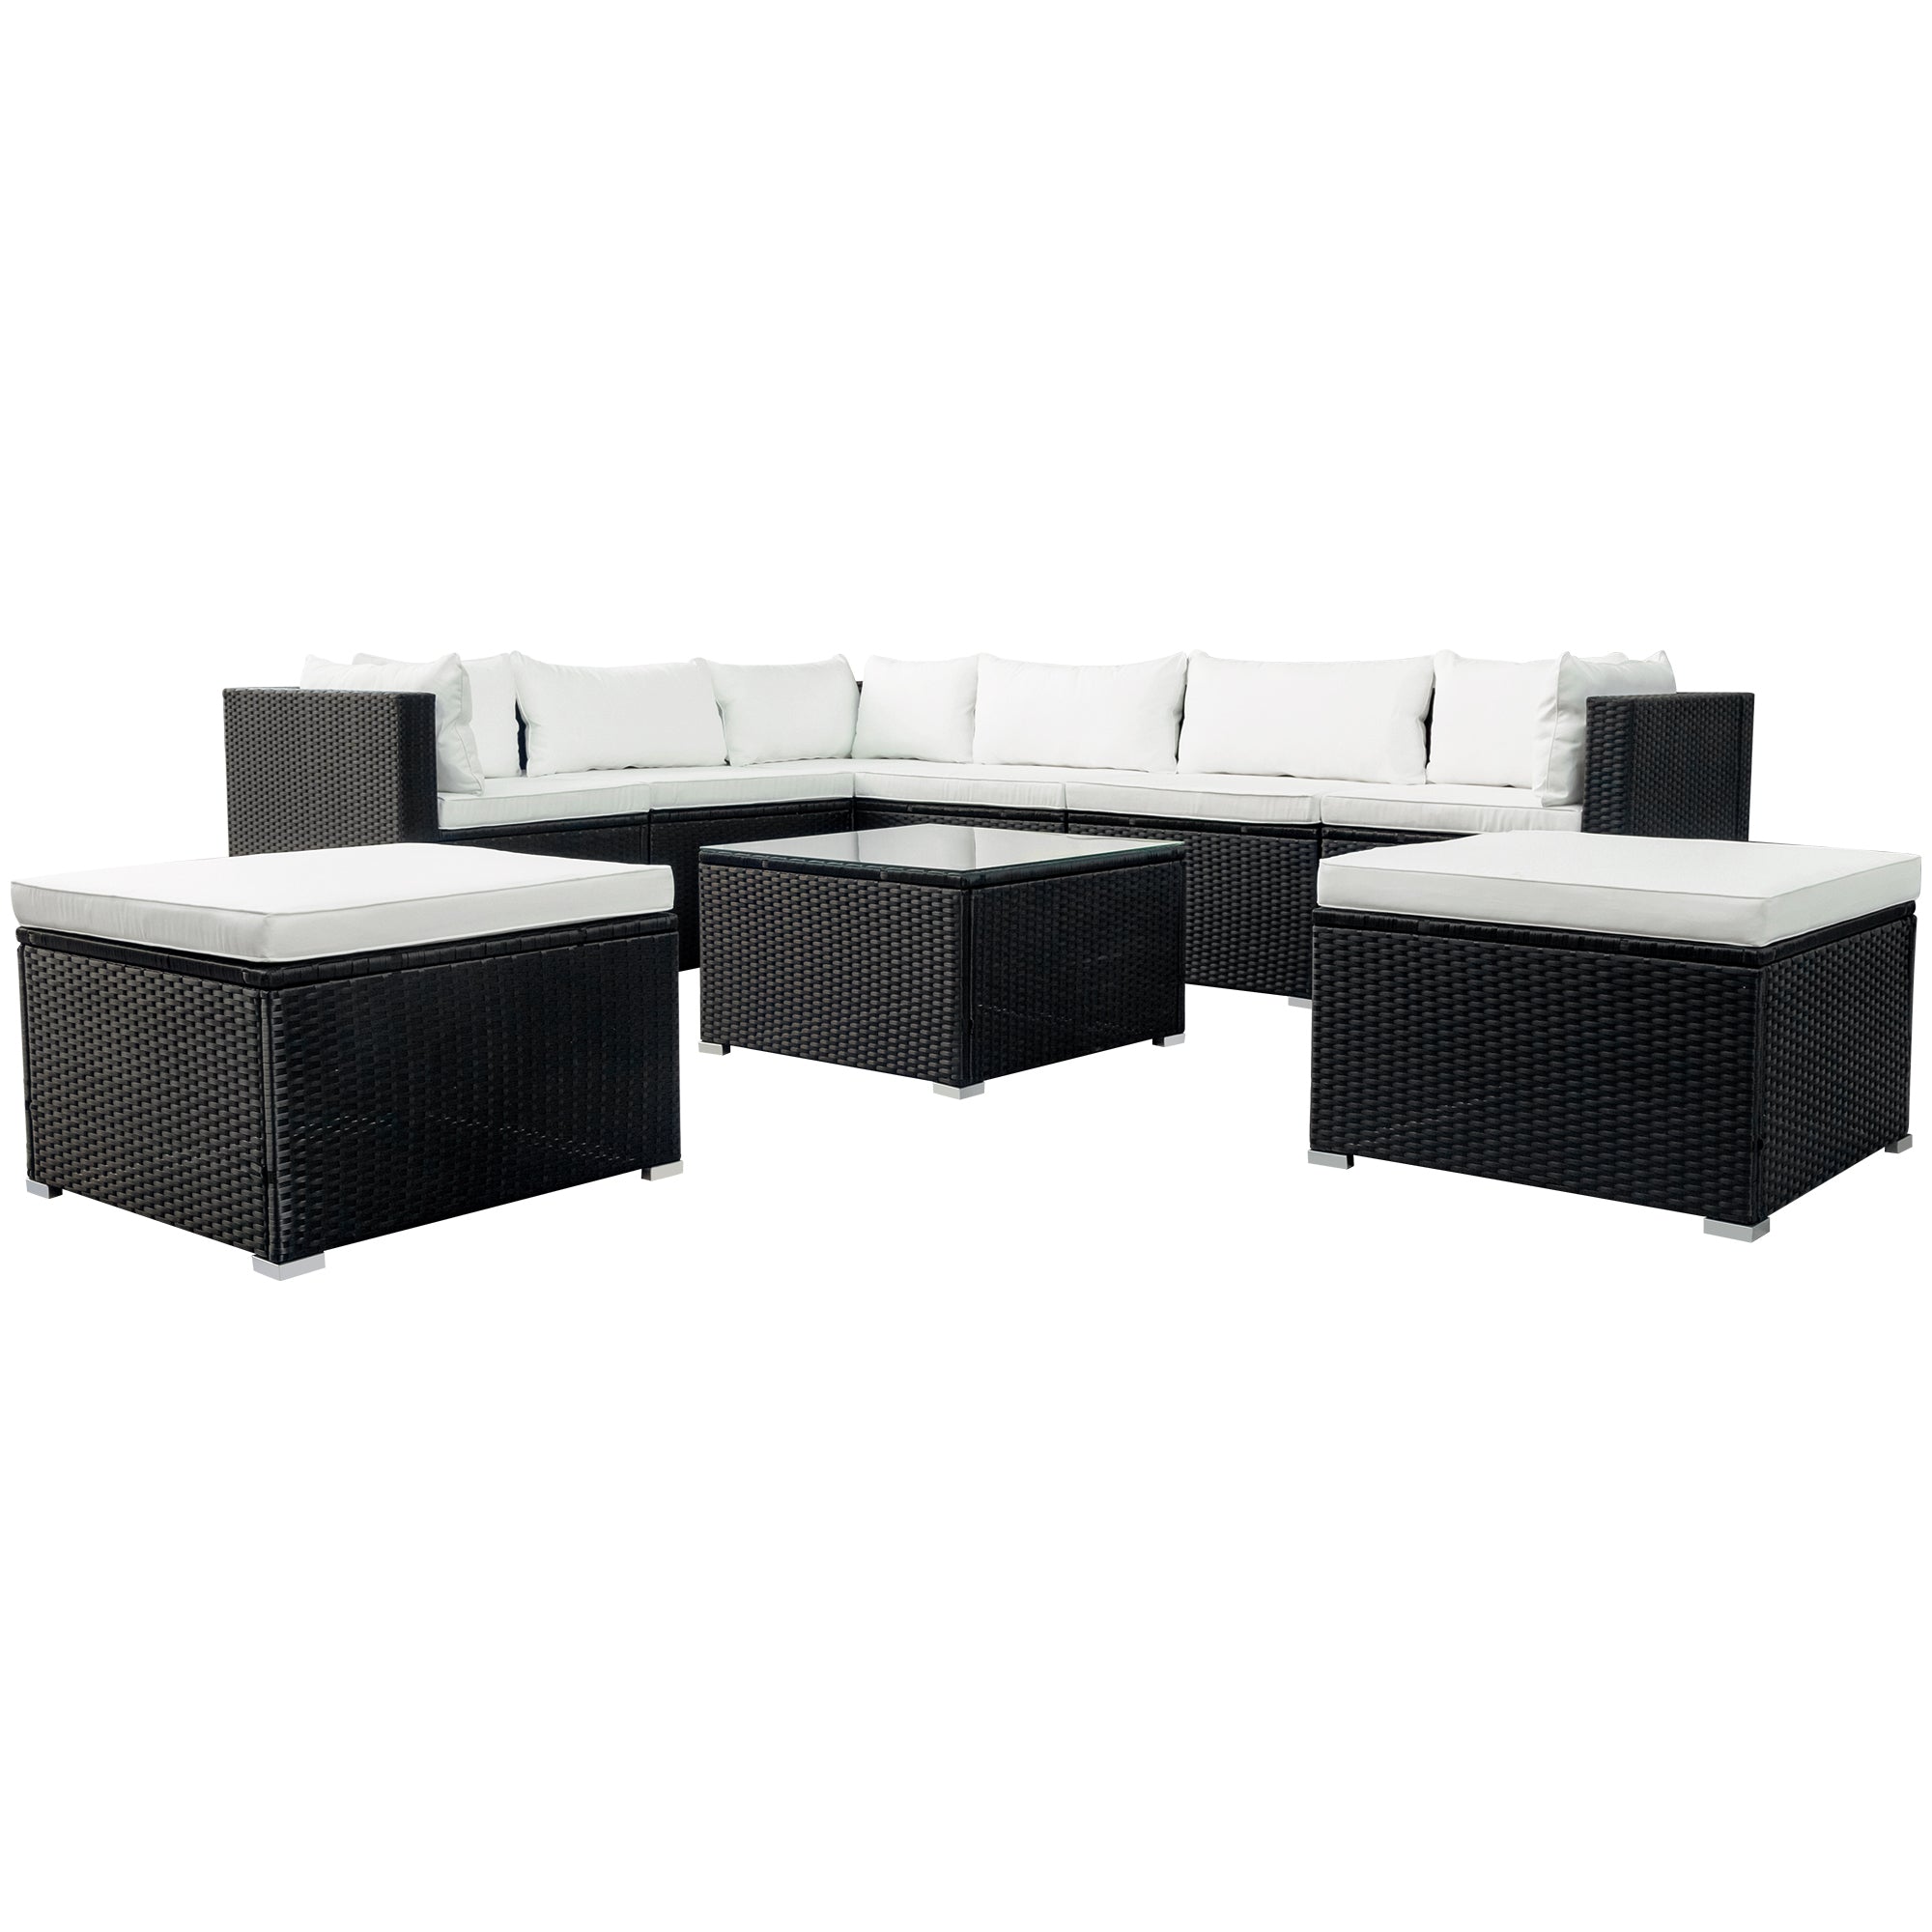 GO 9-piece Outdoor Patio PE Wicker Rattan conversation Sectional Sofa sets with 3 sofa, 3 corner sofa, 2 ottomans, and 1 glass coffee table, removable soft cushions (Black wicker, Beige cushion)